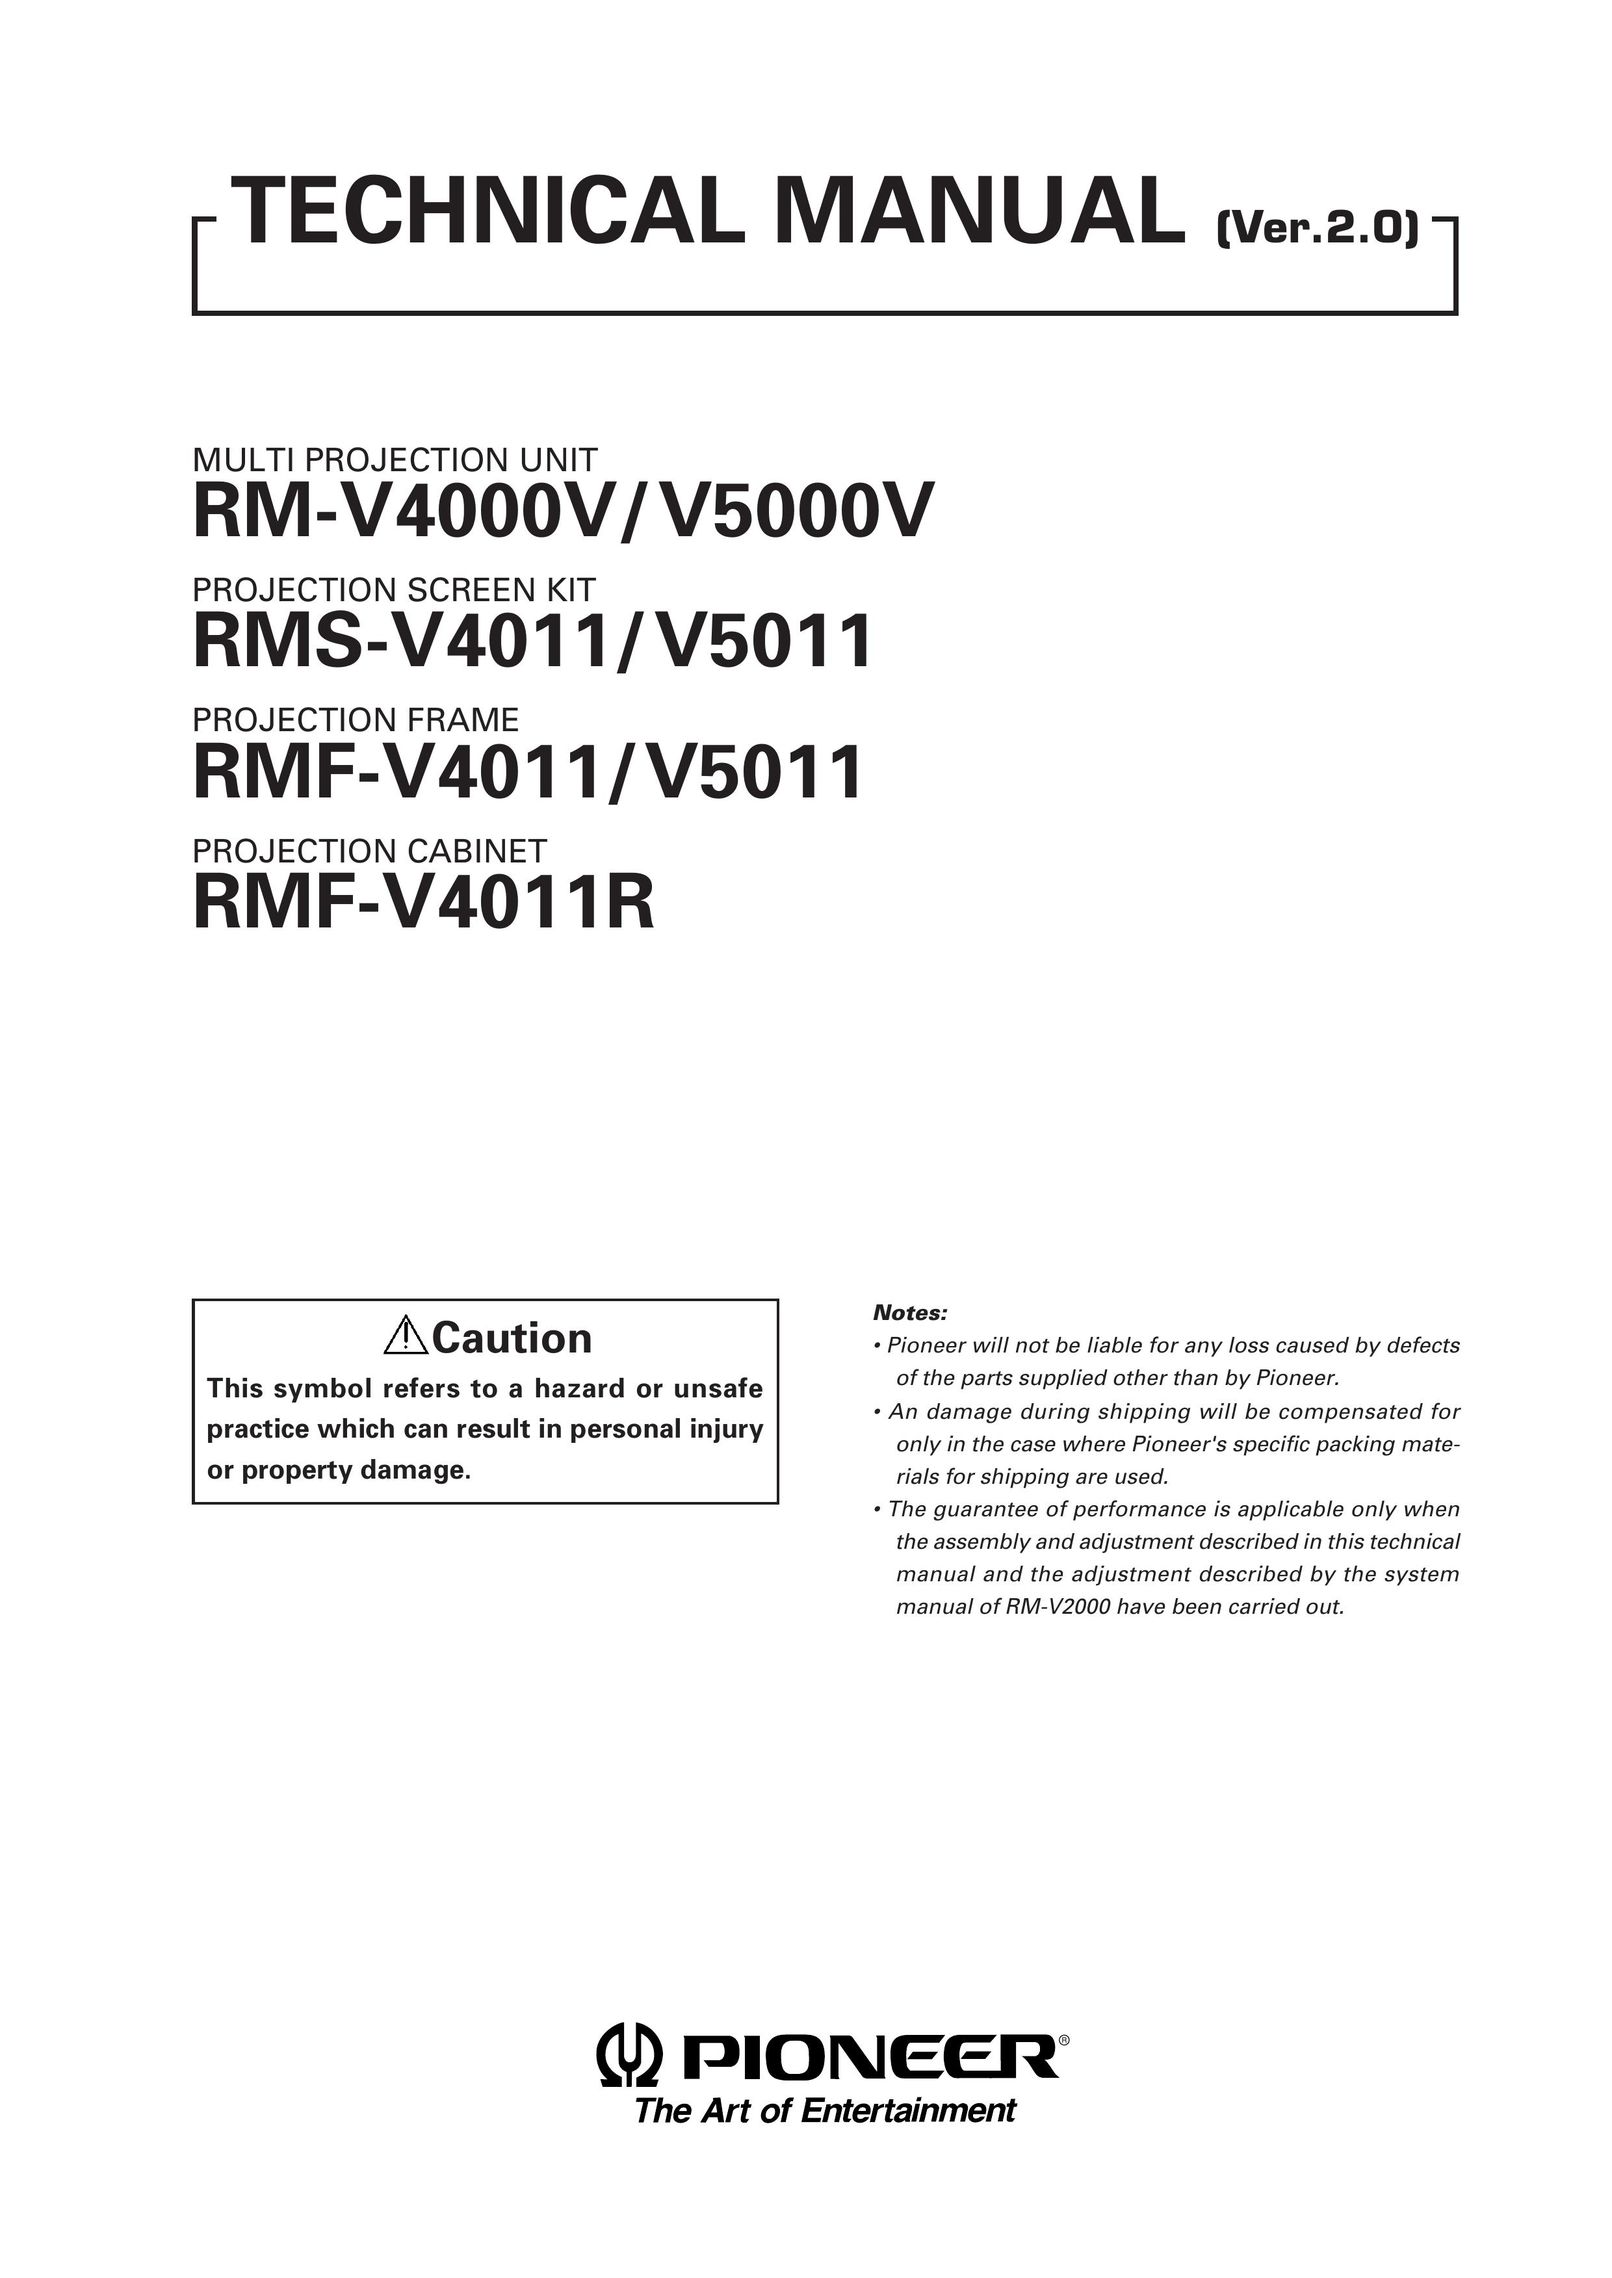 Pioneer RM-V4000V Projector Accessories User Manual